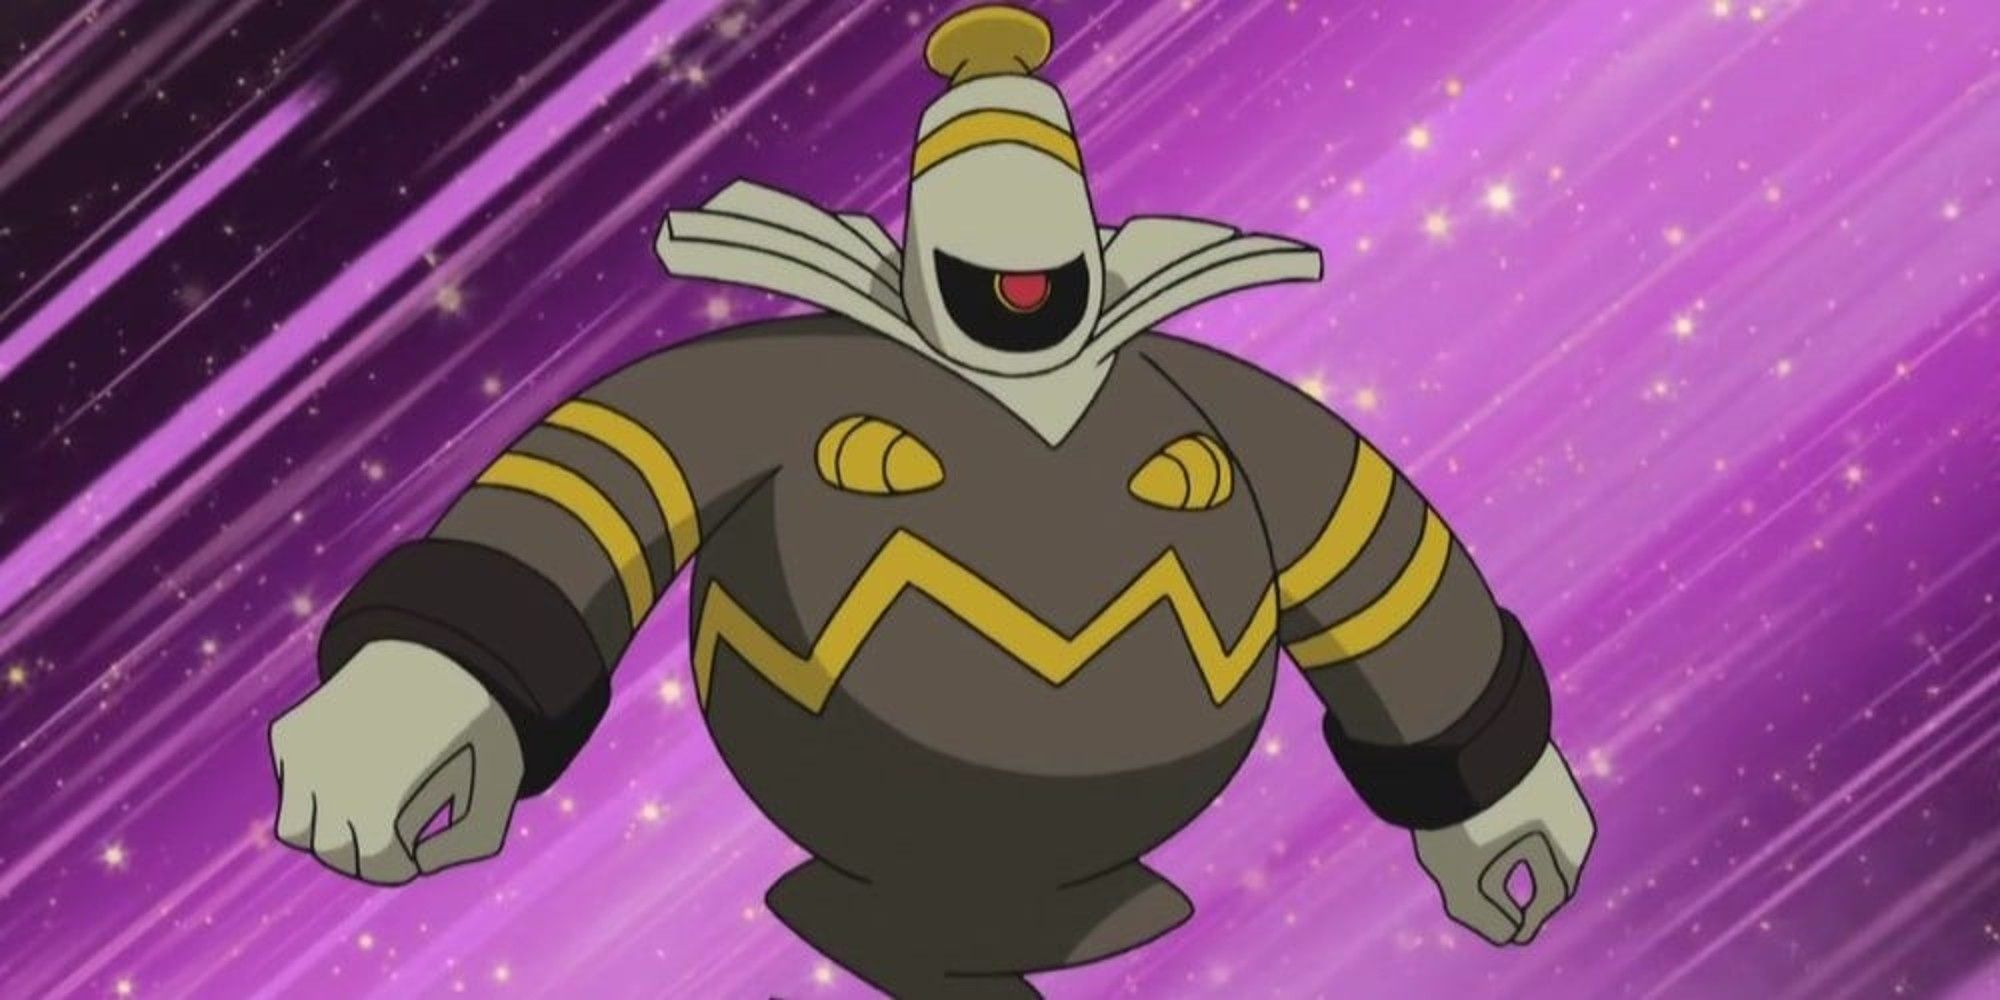 Pokemon Anime Ghost Type Dusknoir with pink background during combat